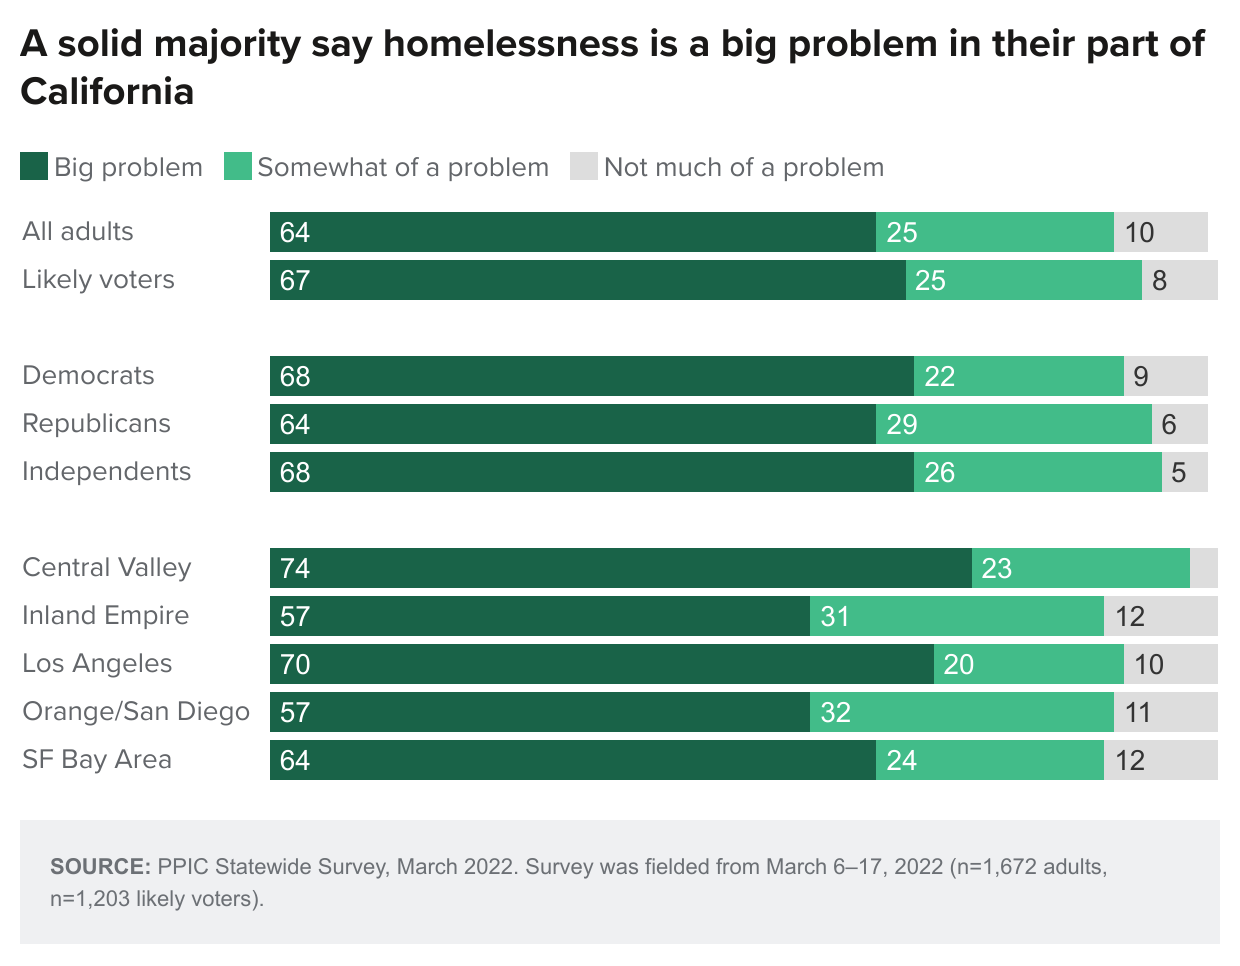 figure - A solid majority say homelessness is a big problem in their part of California